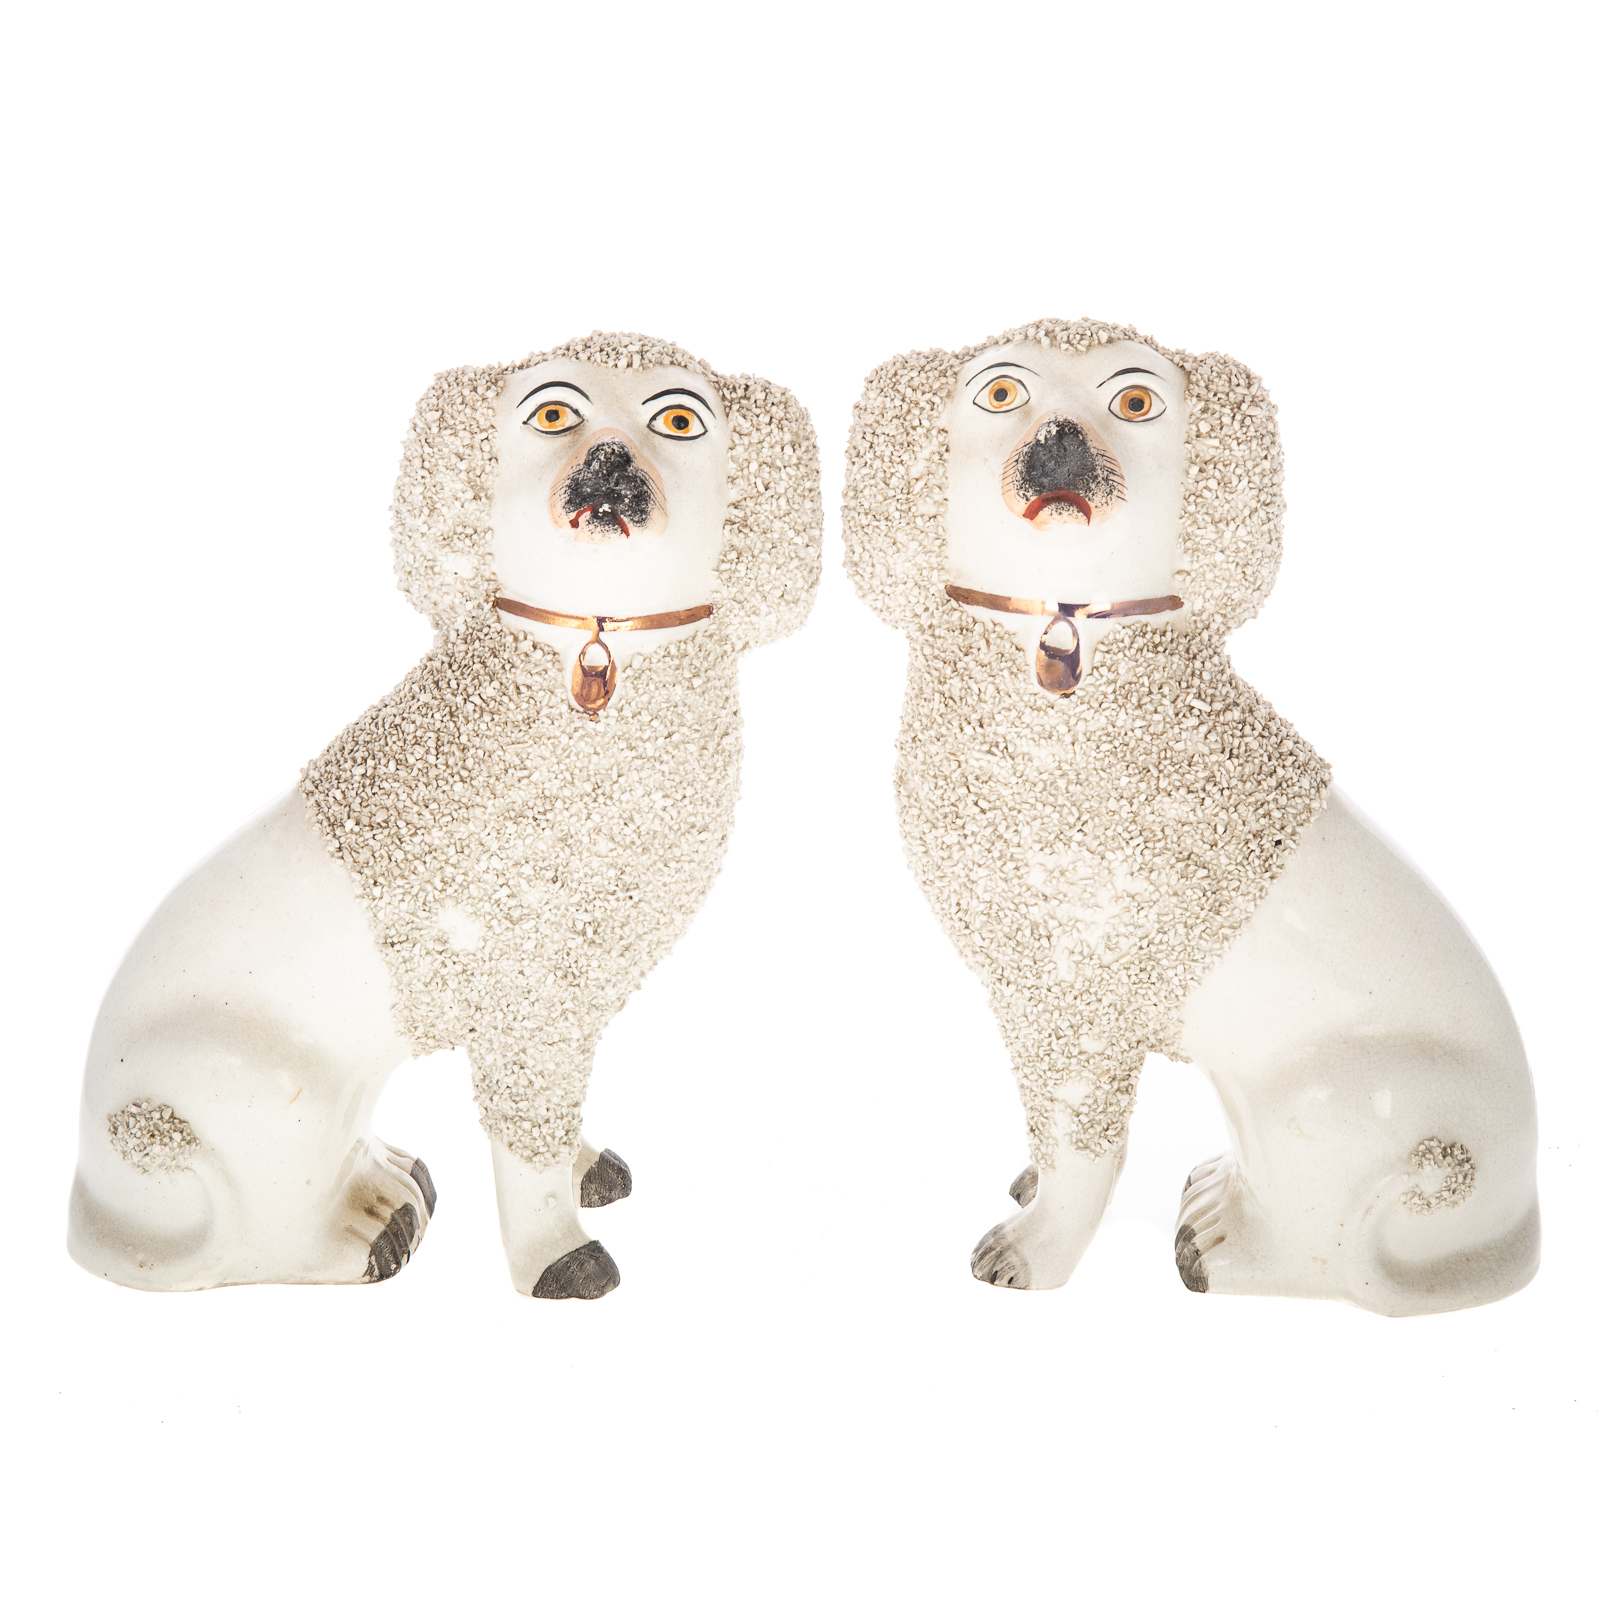 A PAIR OF STAFFORDSHIRE POODLES 36a835